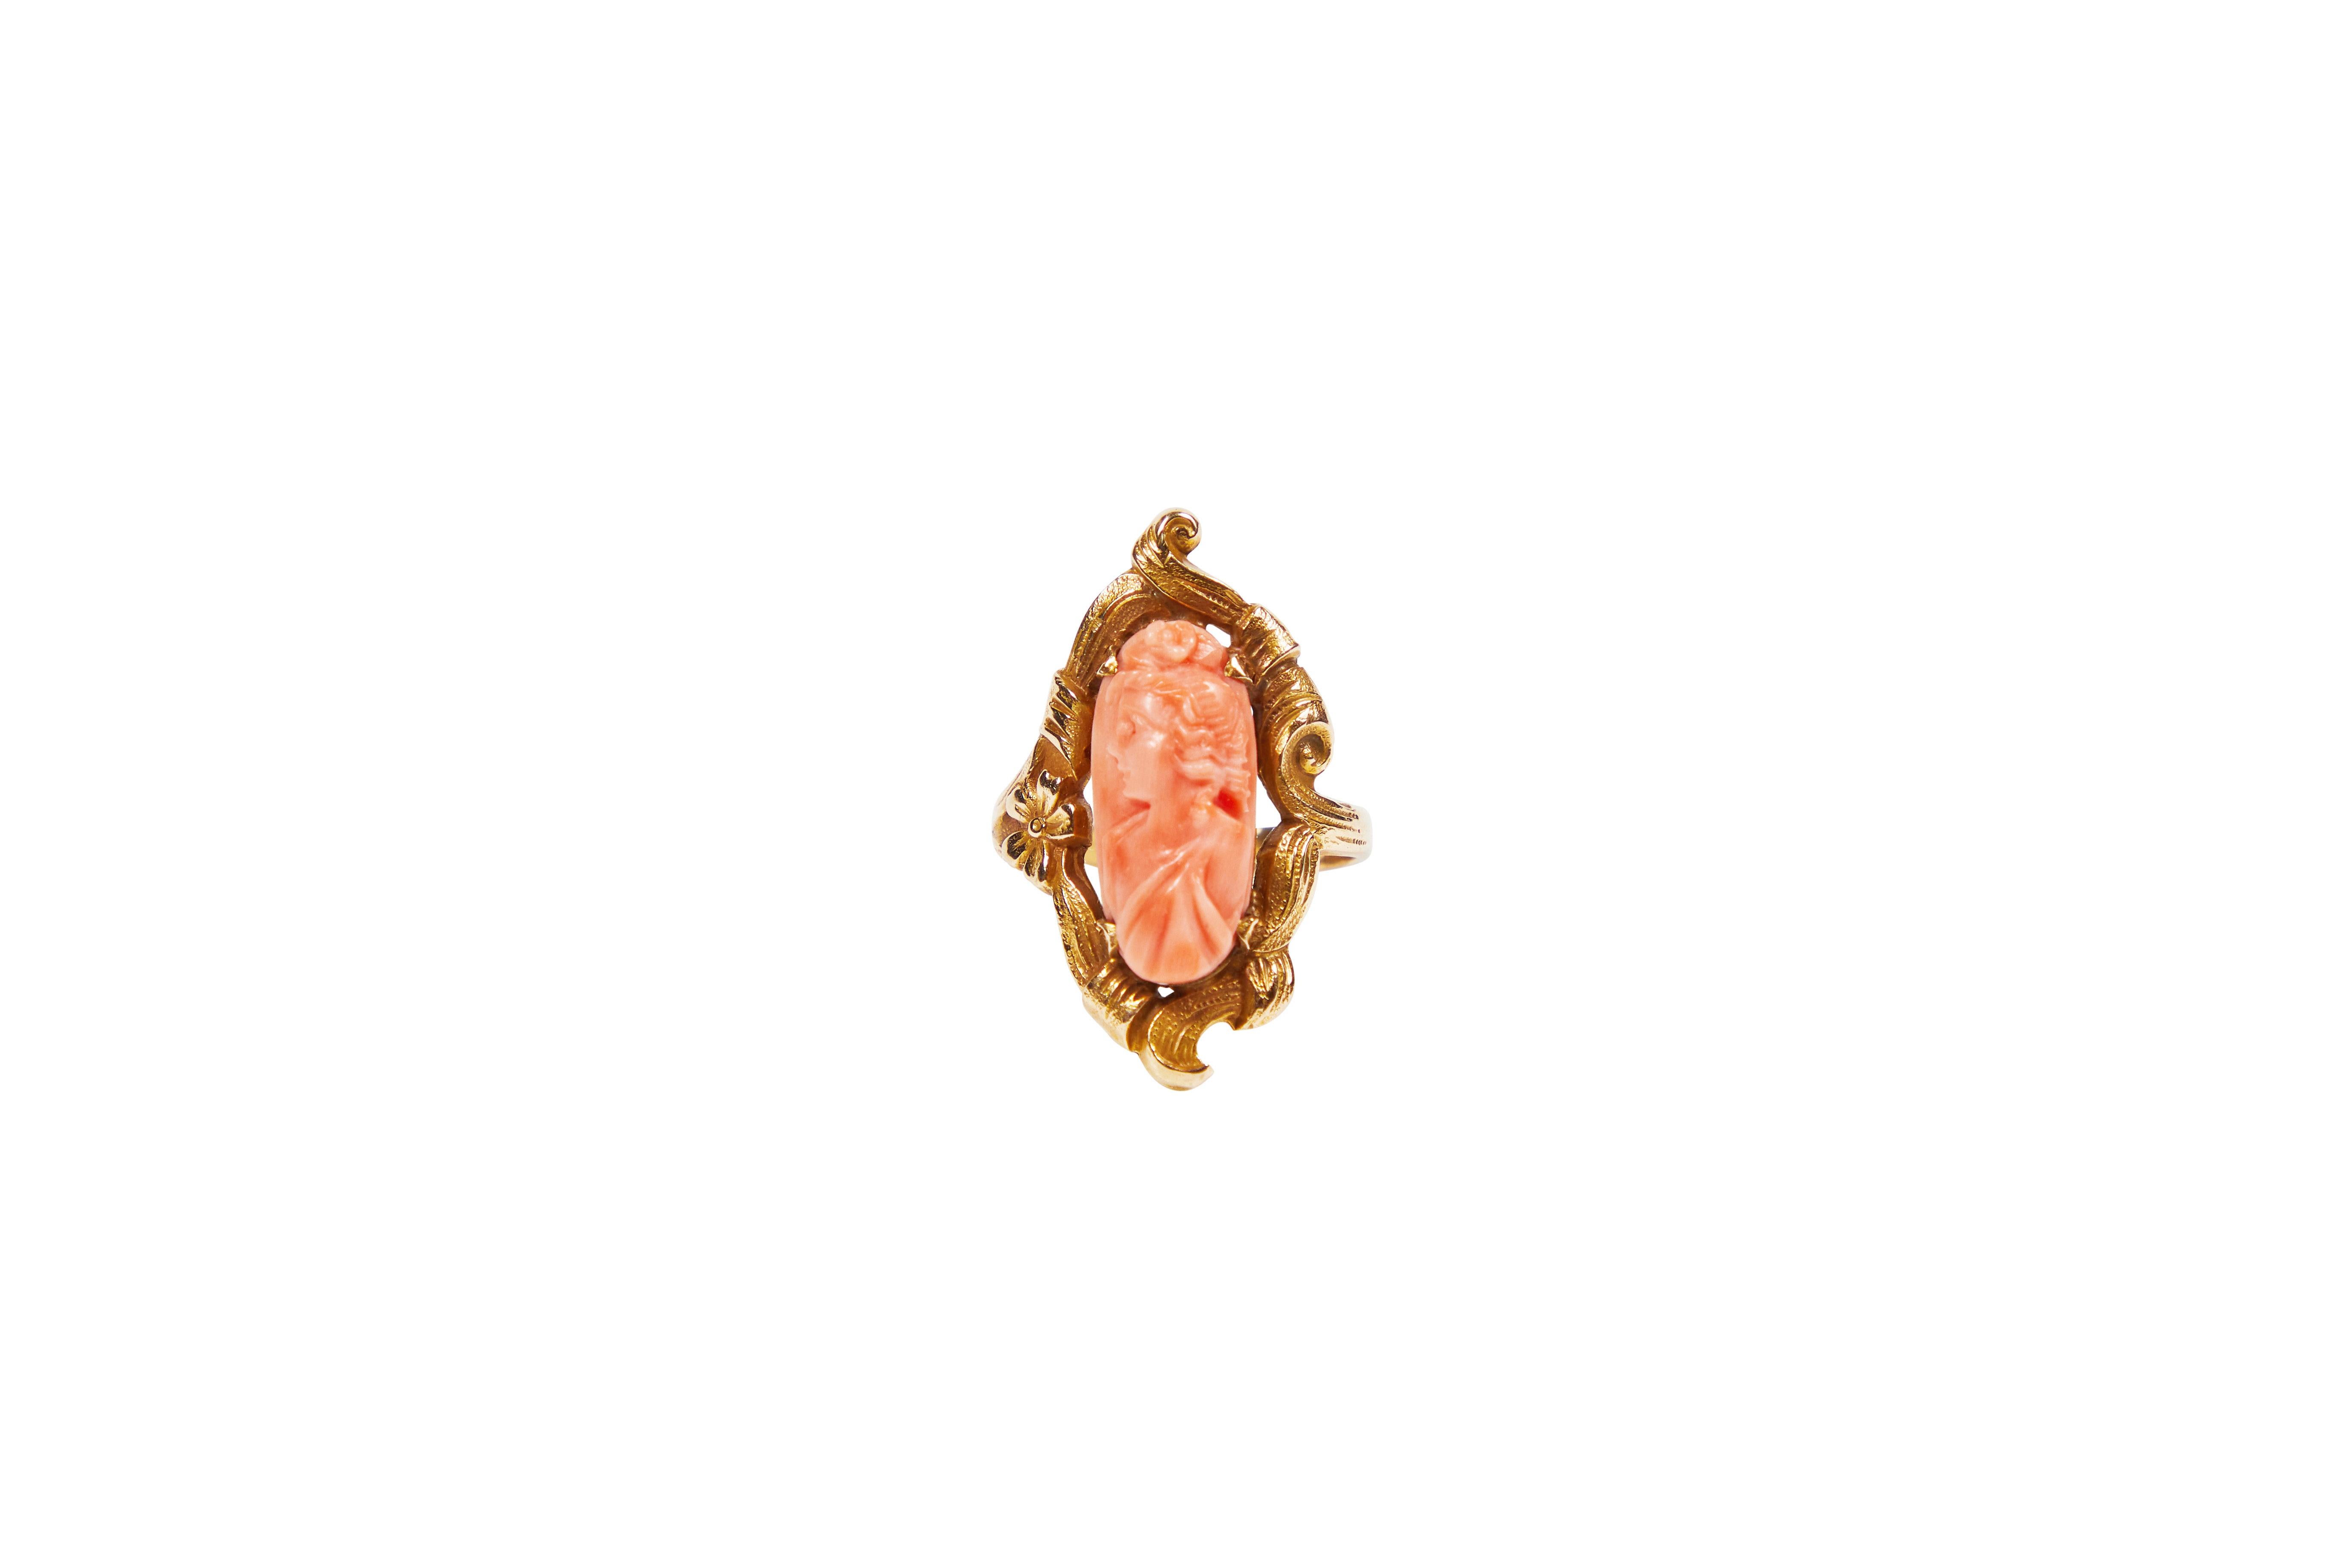 Antique carved angel skin coral elongated oval cameo ring with an decorative setting set in 10KT (c 1920). Carving is of maiden in toga with hair in topknot. Size 6.


